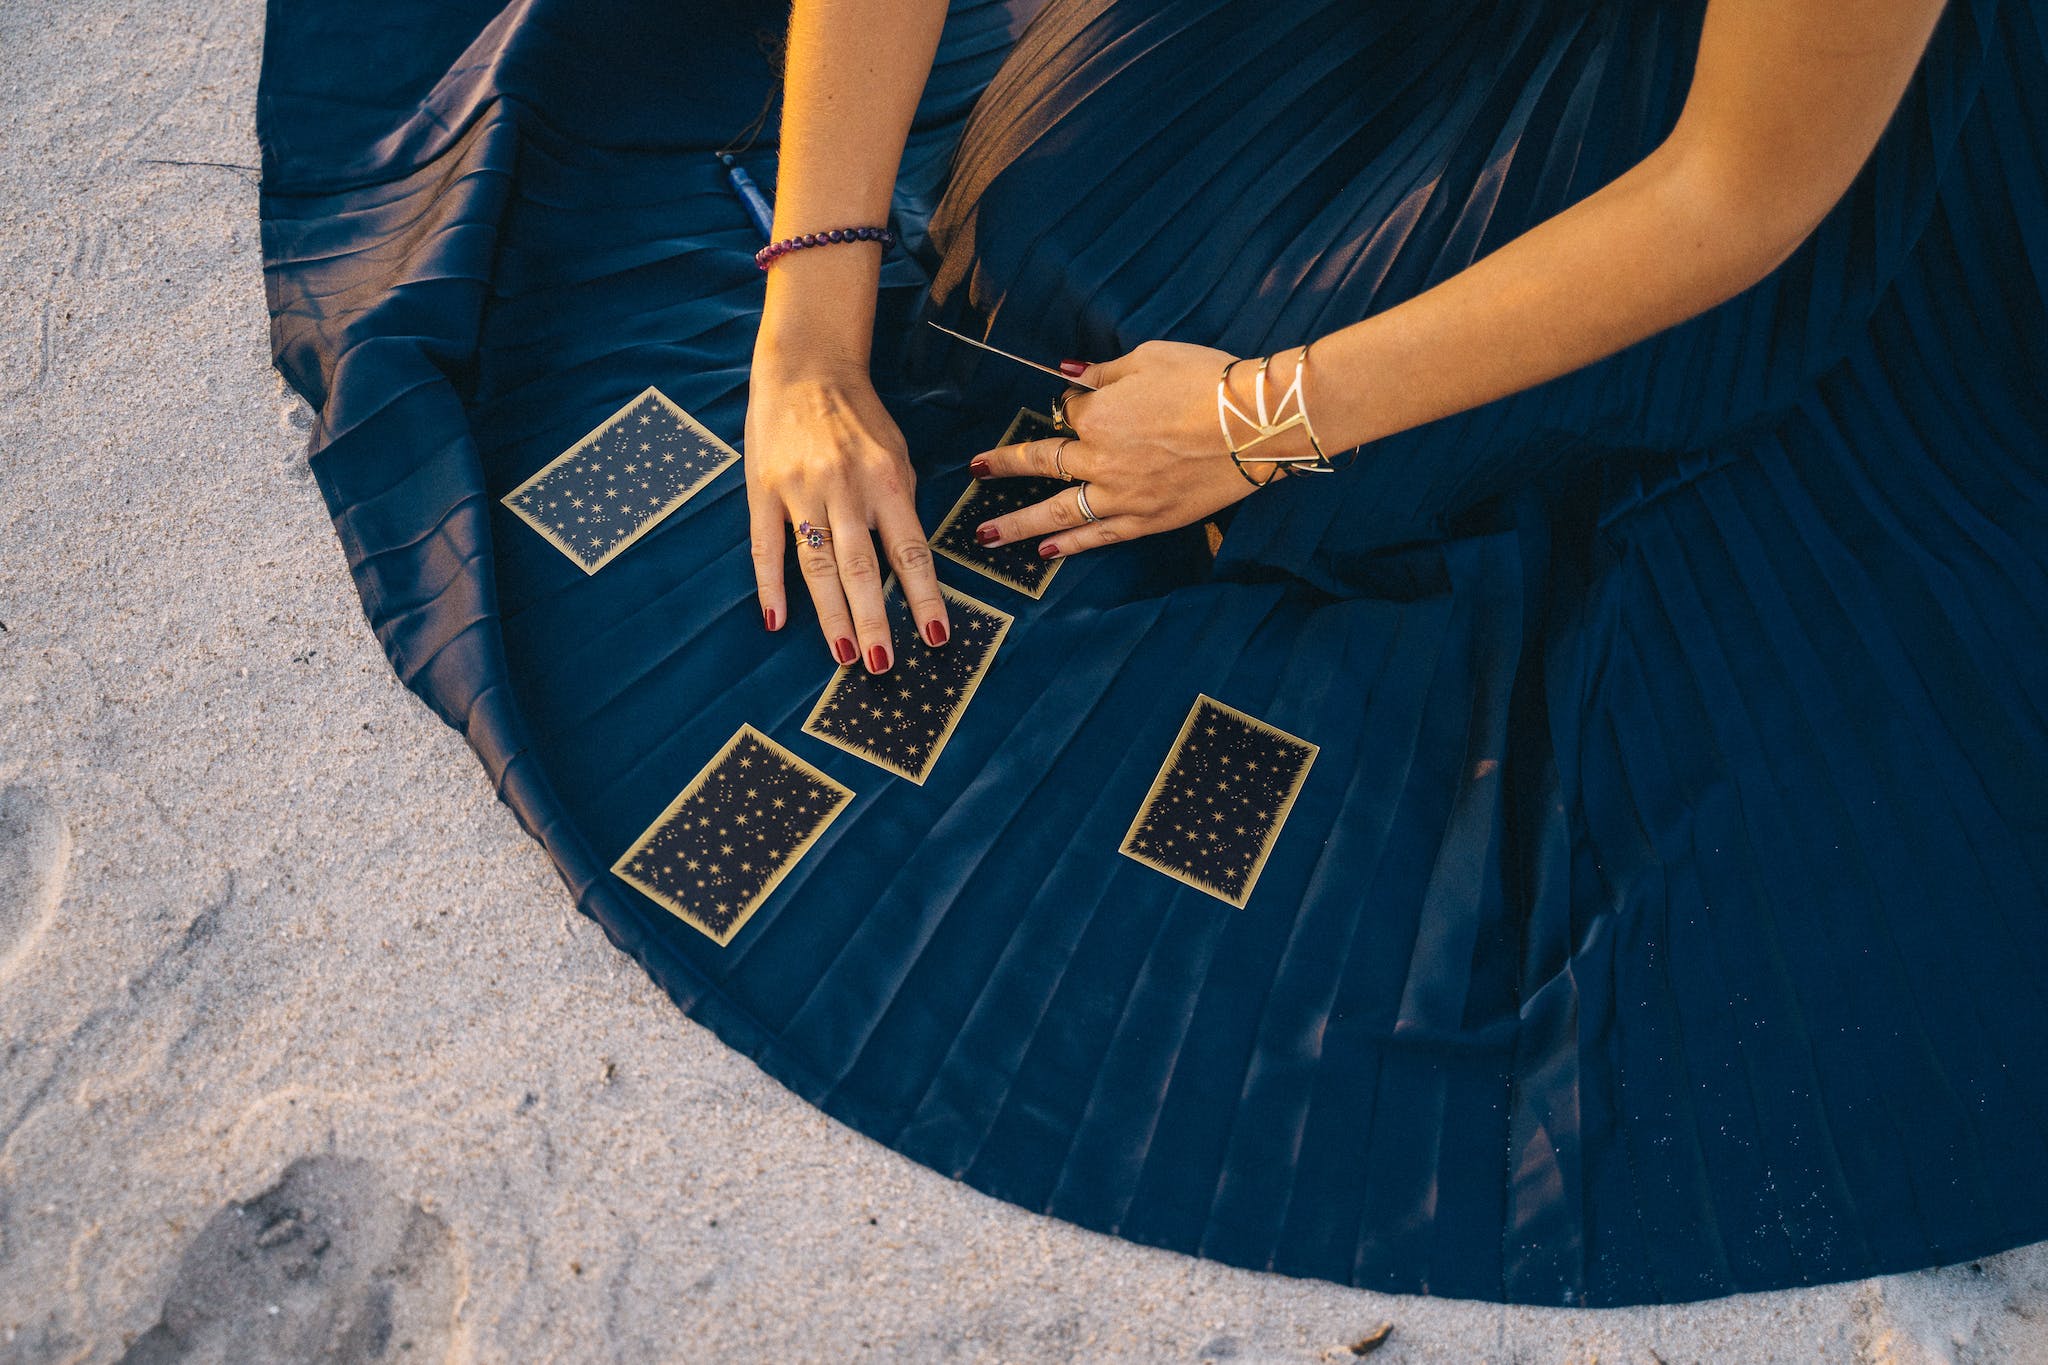 Woman In Blue Skirt Holding Tarot Cards questions for tarot reading